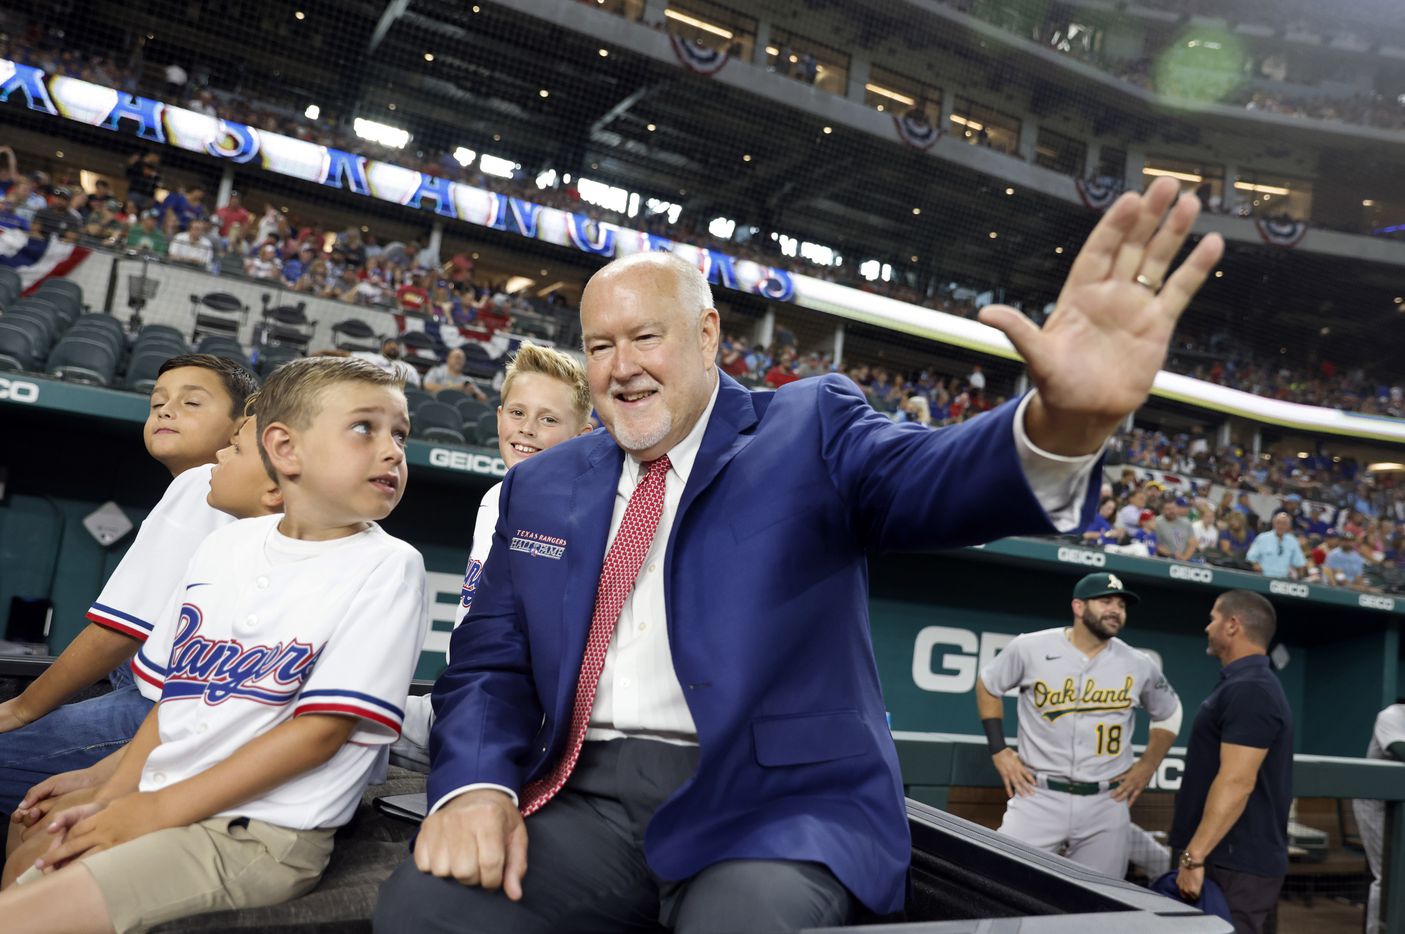 Texas Rangers executive vice president and public address announcer Chuck Morgan waves to ball players following his induction into the Texas Rangers Baseball Hall of Fame at Globe Life Field in Arlington, Saturday, August 14, 2021.(Tom Fox/The Dallas Morning News)